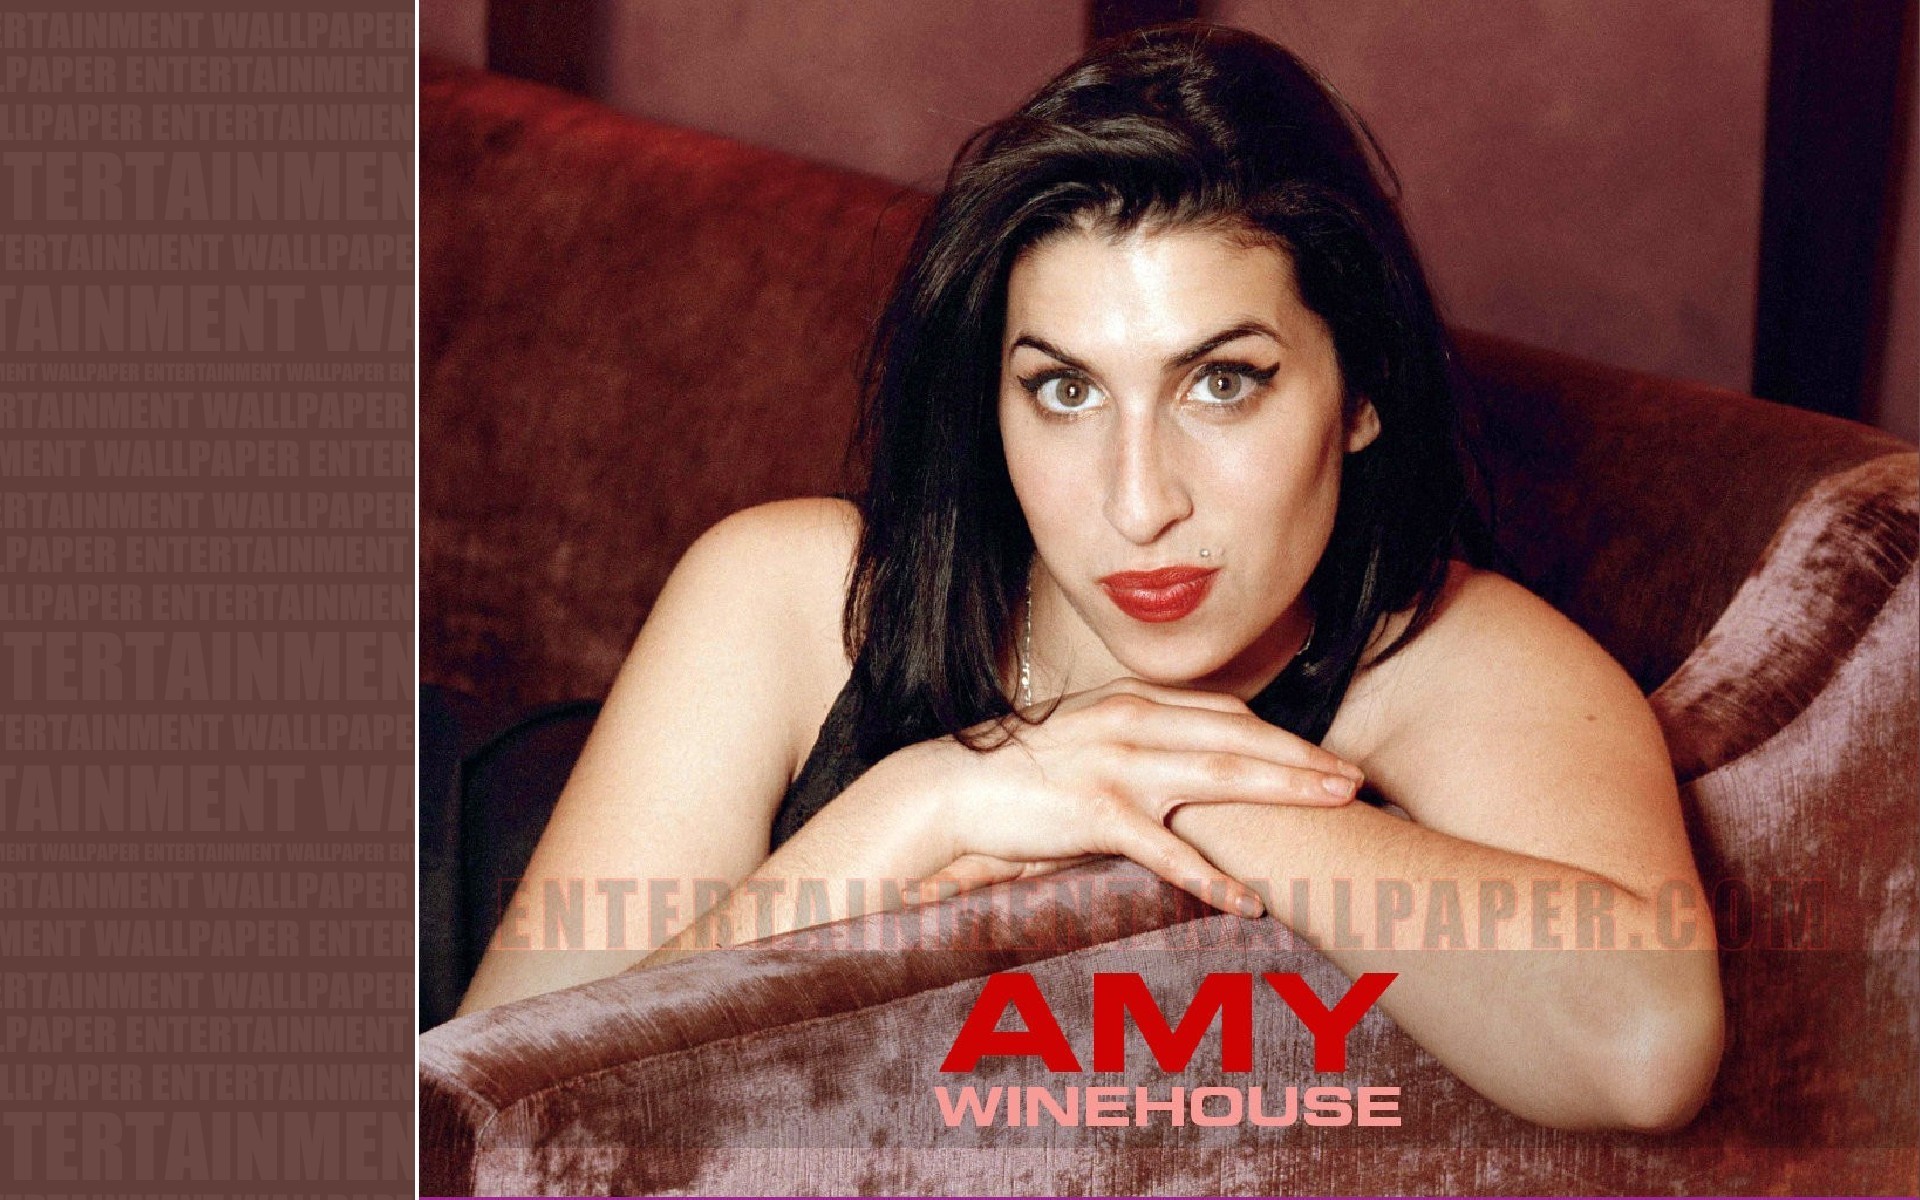 1920x1200 Amy Winehouse Wallpaper - Original size, download now.